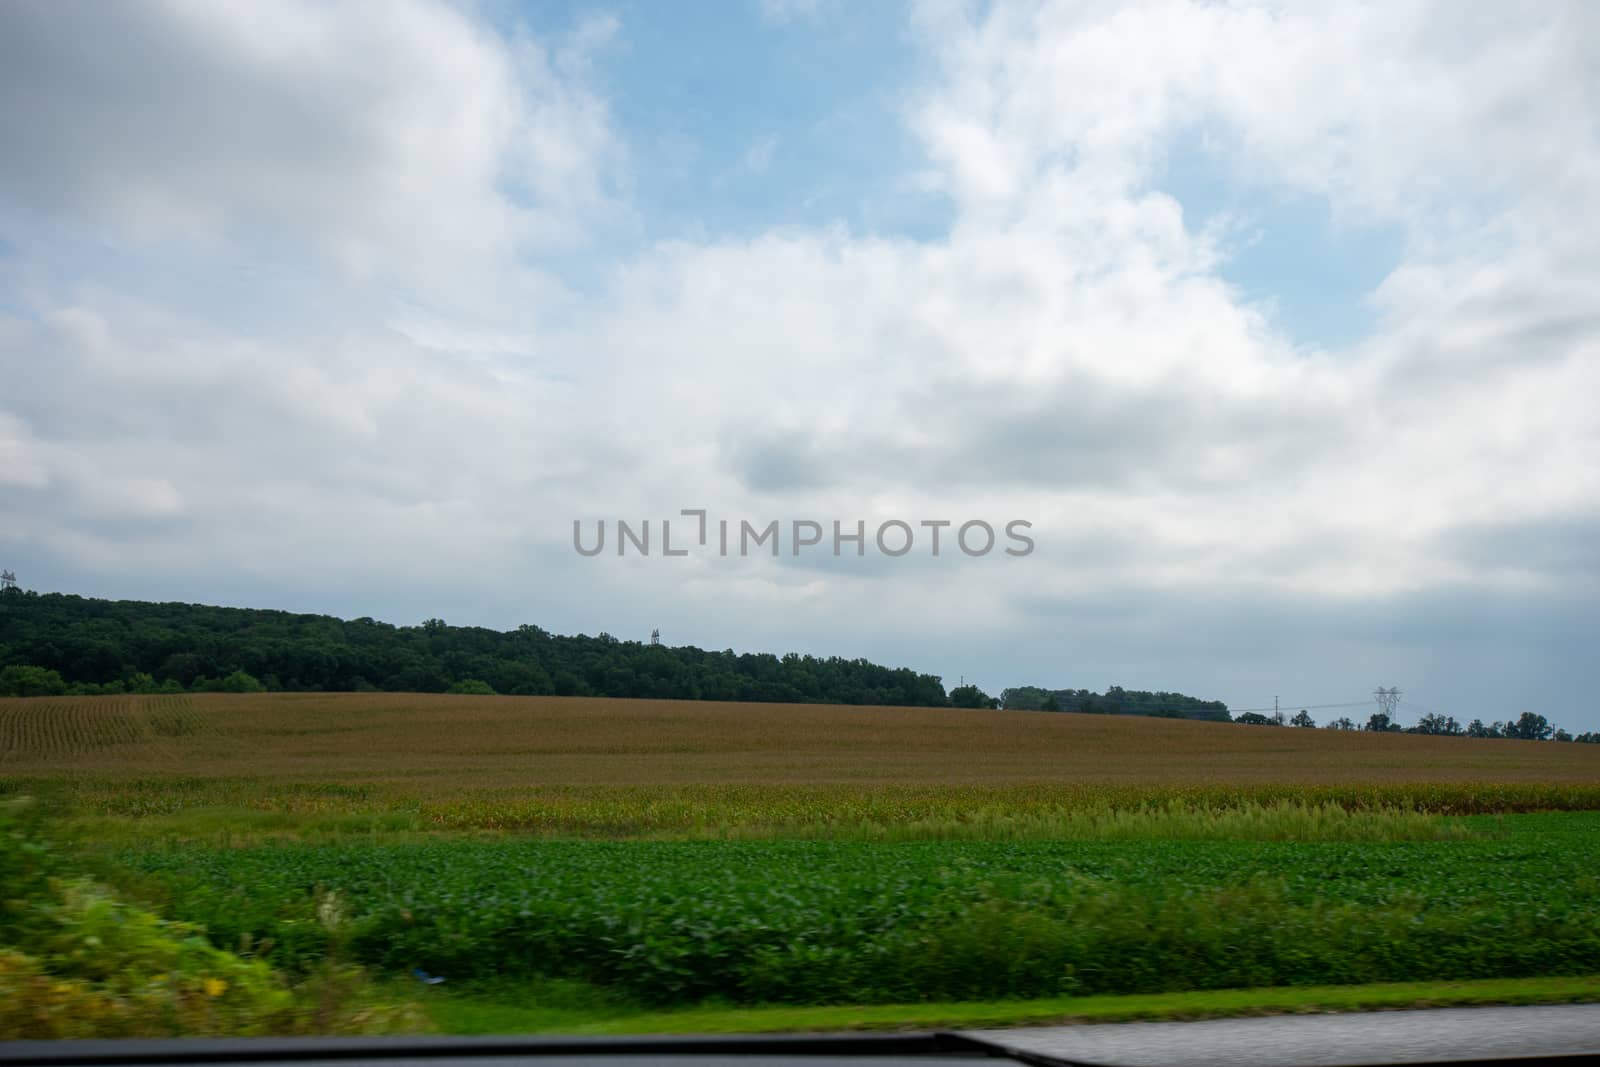 Looking Out the Car at A Huge Field Full of Fresh Crops Flying B by bju12290